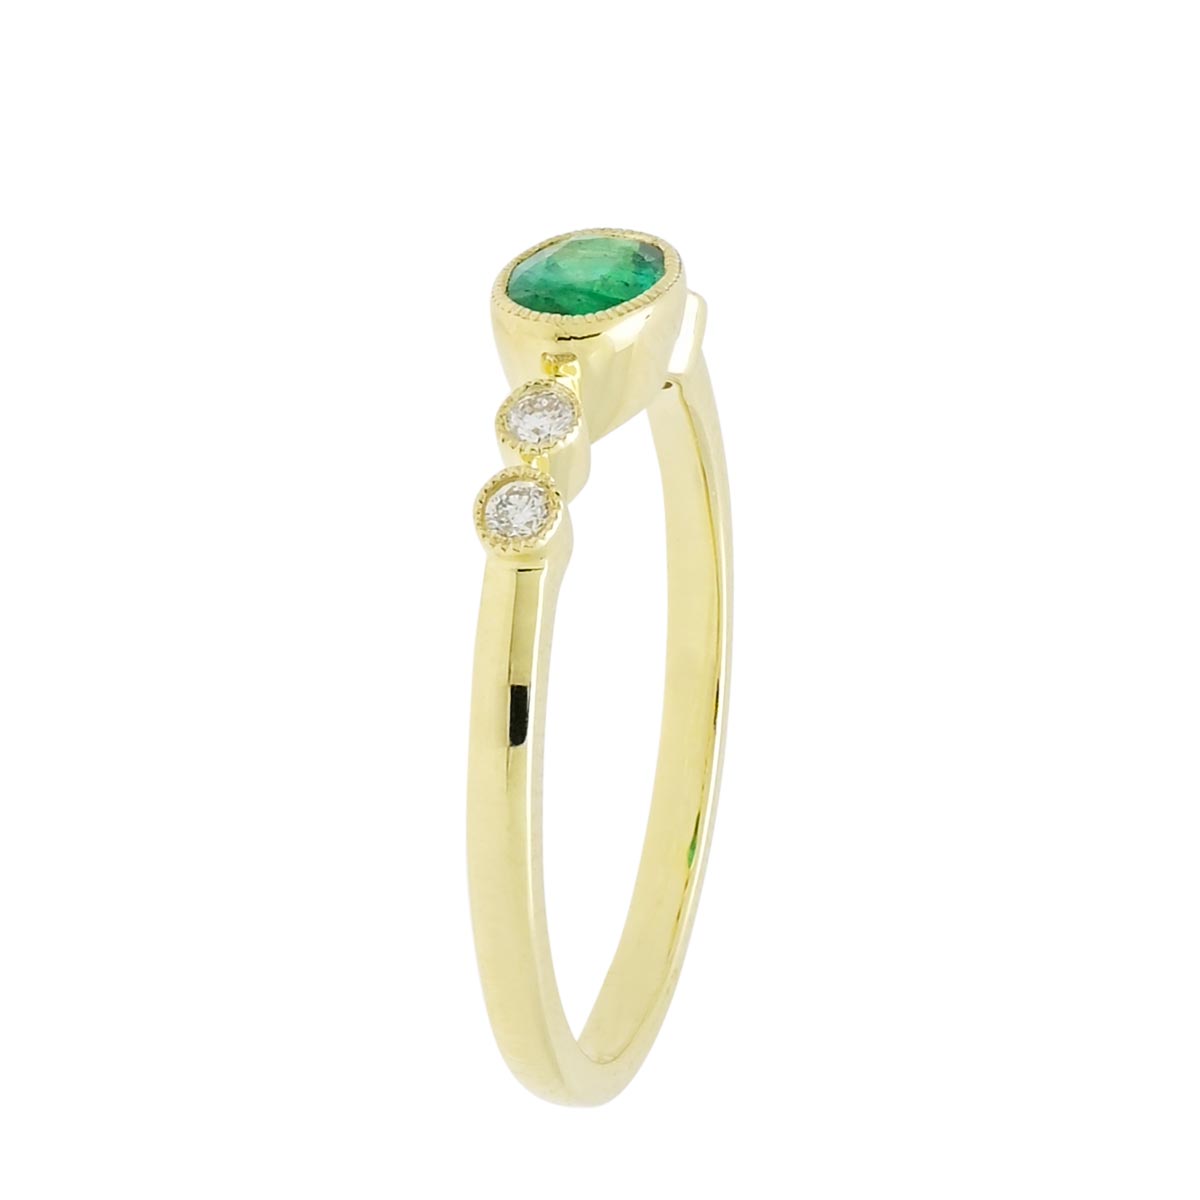 Dabakarov Oval Emerald Bezel Ring in 14kt Yellow Gold with Diamonds (1/10ct tw)